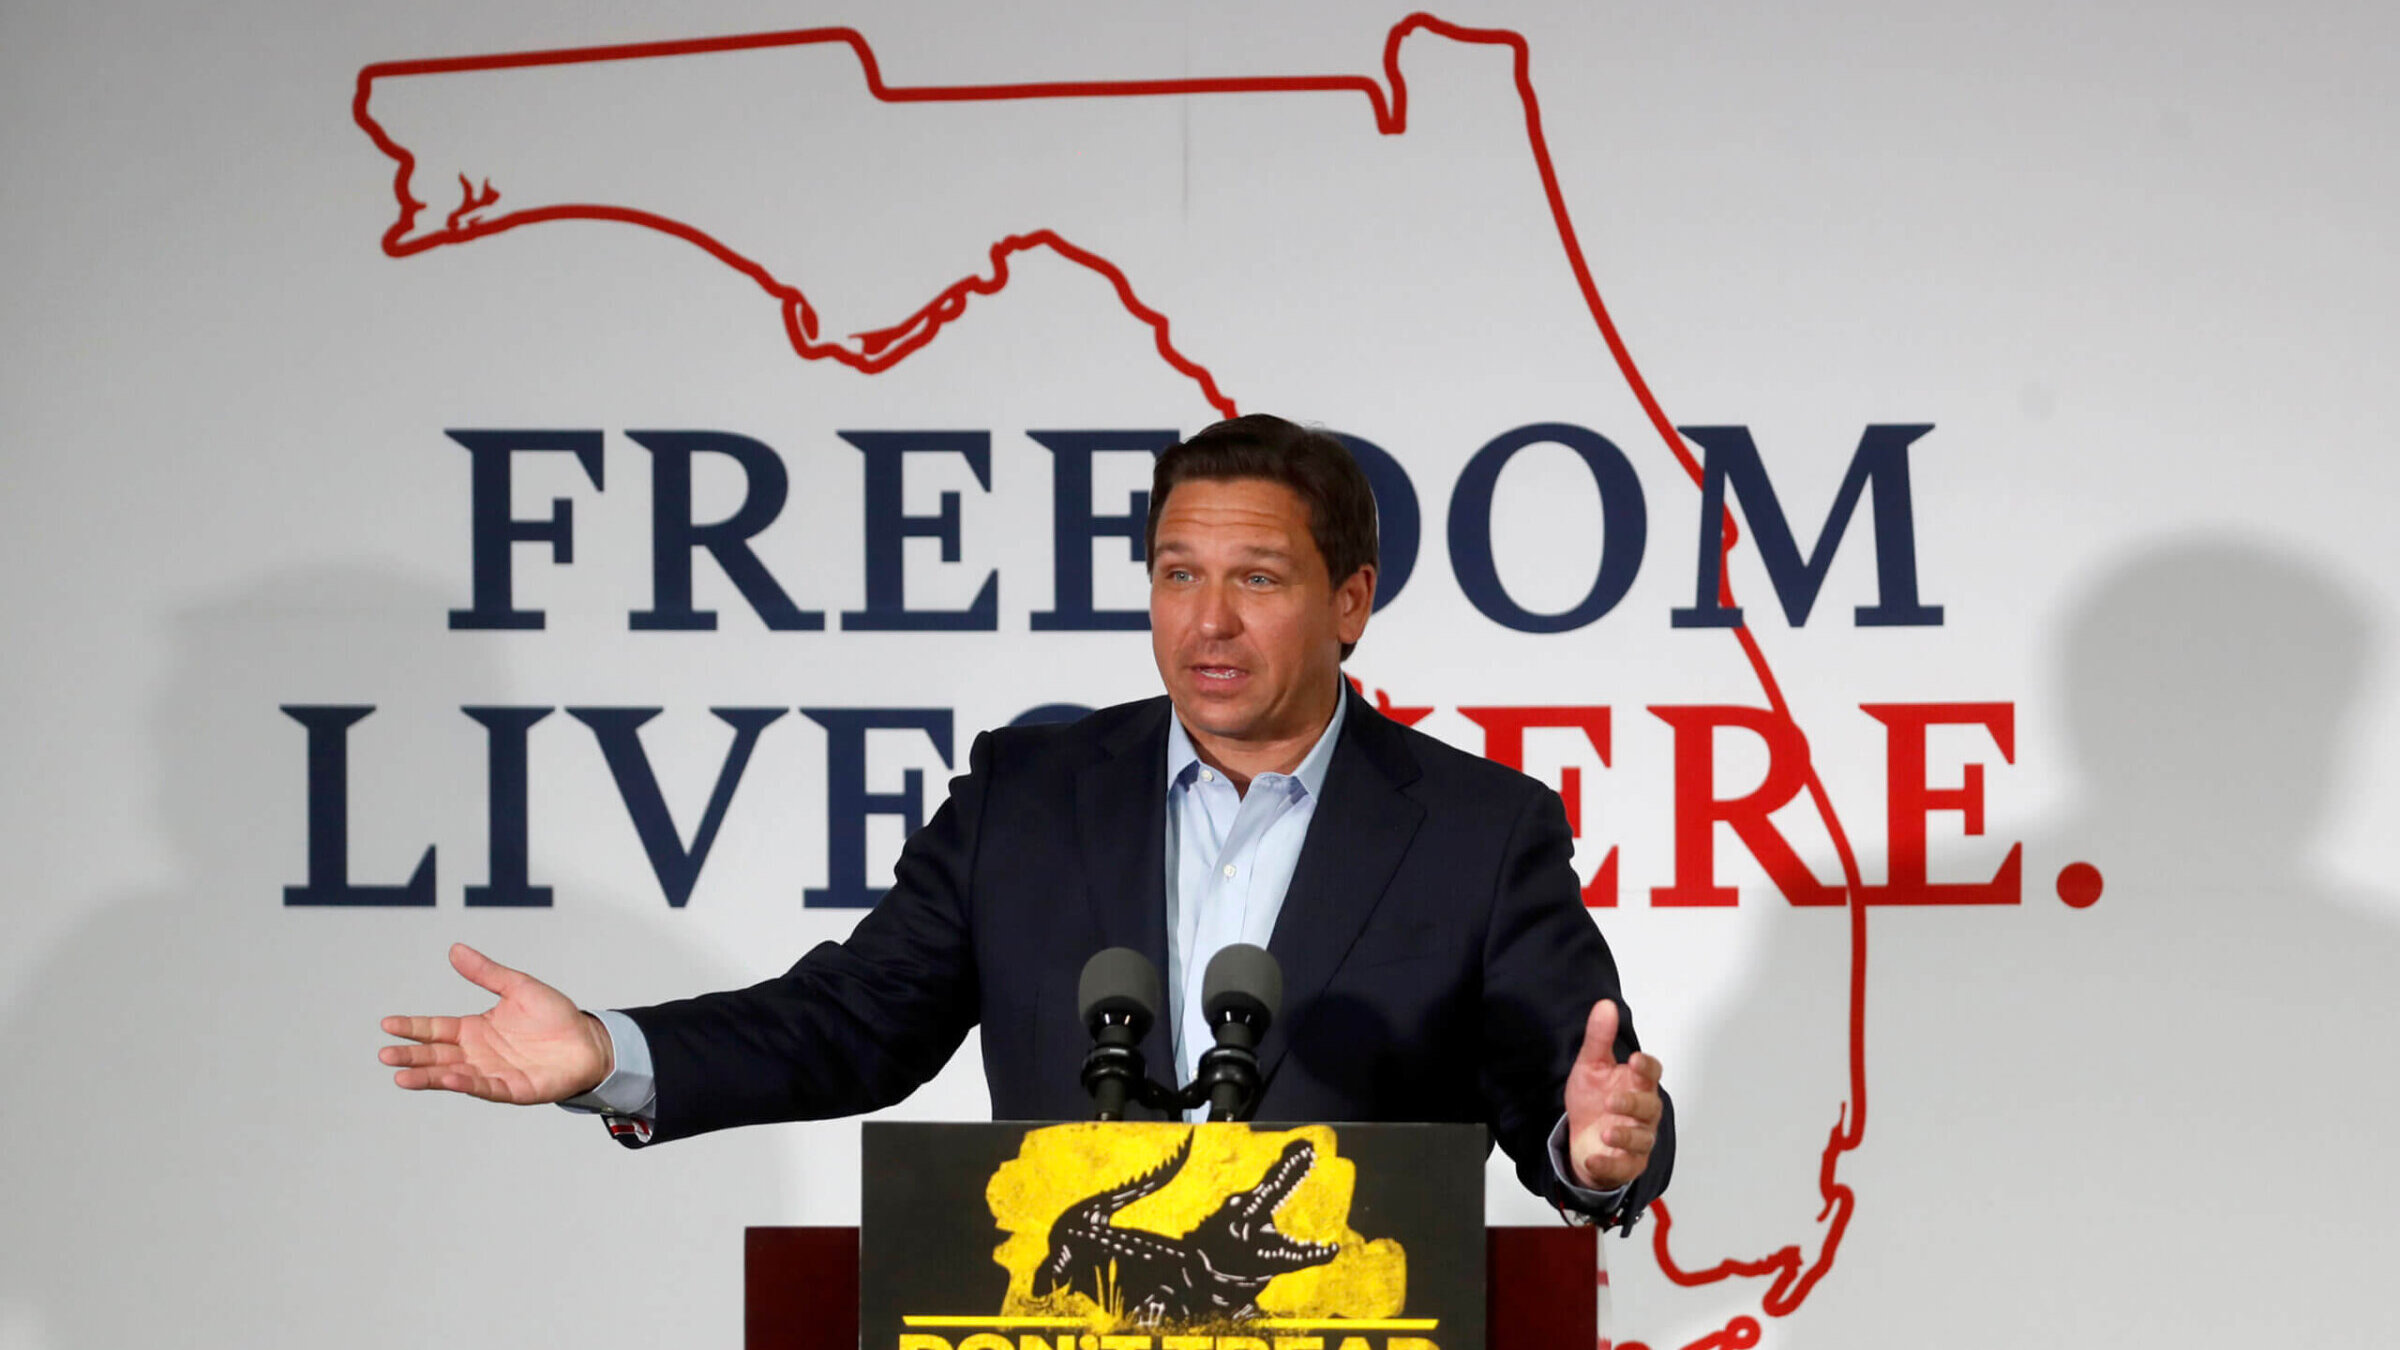 Republican Florida Gov. Ron DeSantis gives a campaign speech at the SCC Community Hall on Nov. 6, 2022 in Sun City Center, Florida. DeSantis signed legislation defunding diversity programs at the state's public colleges and universities, prompting the NAACP to issue a travel advisory. 